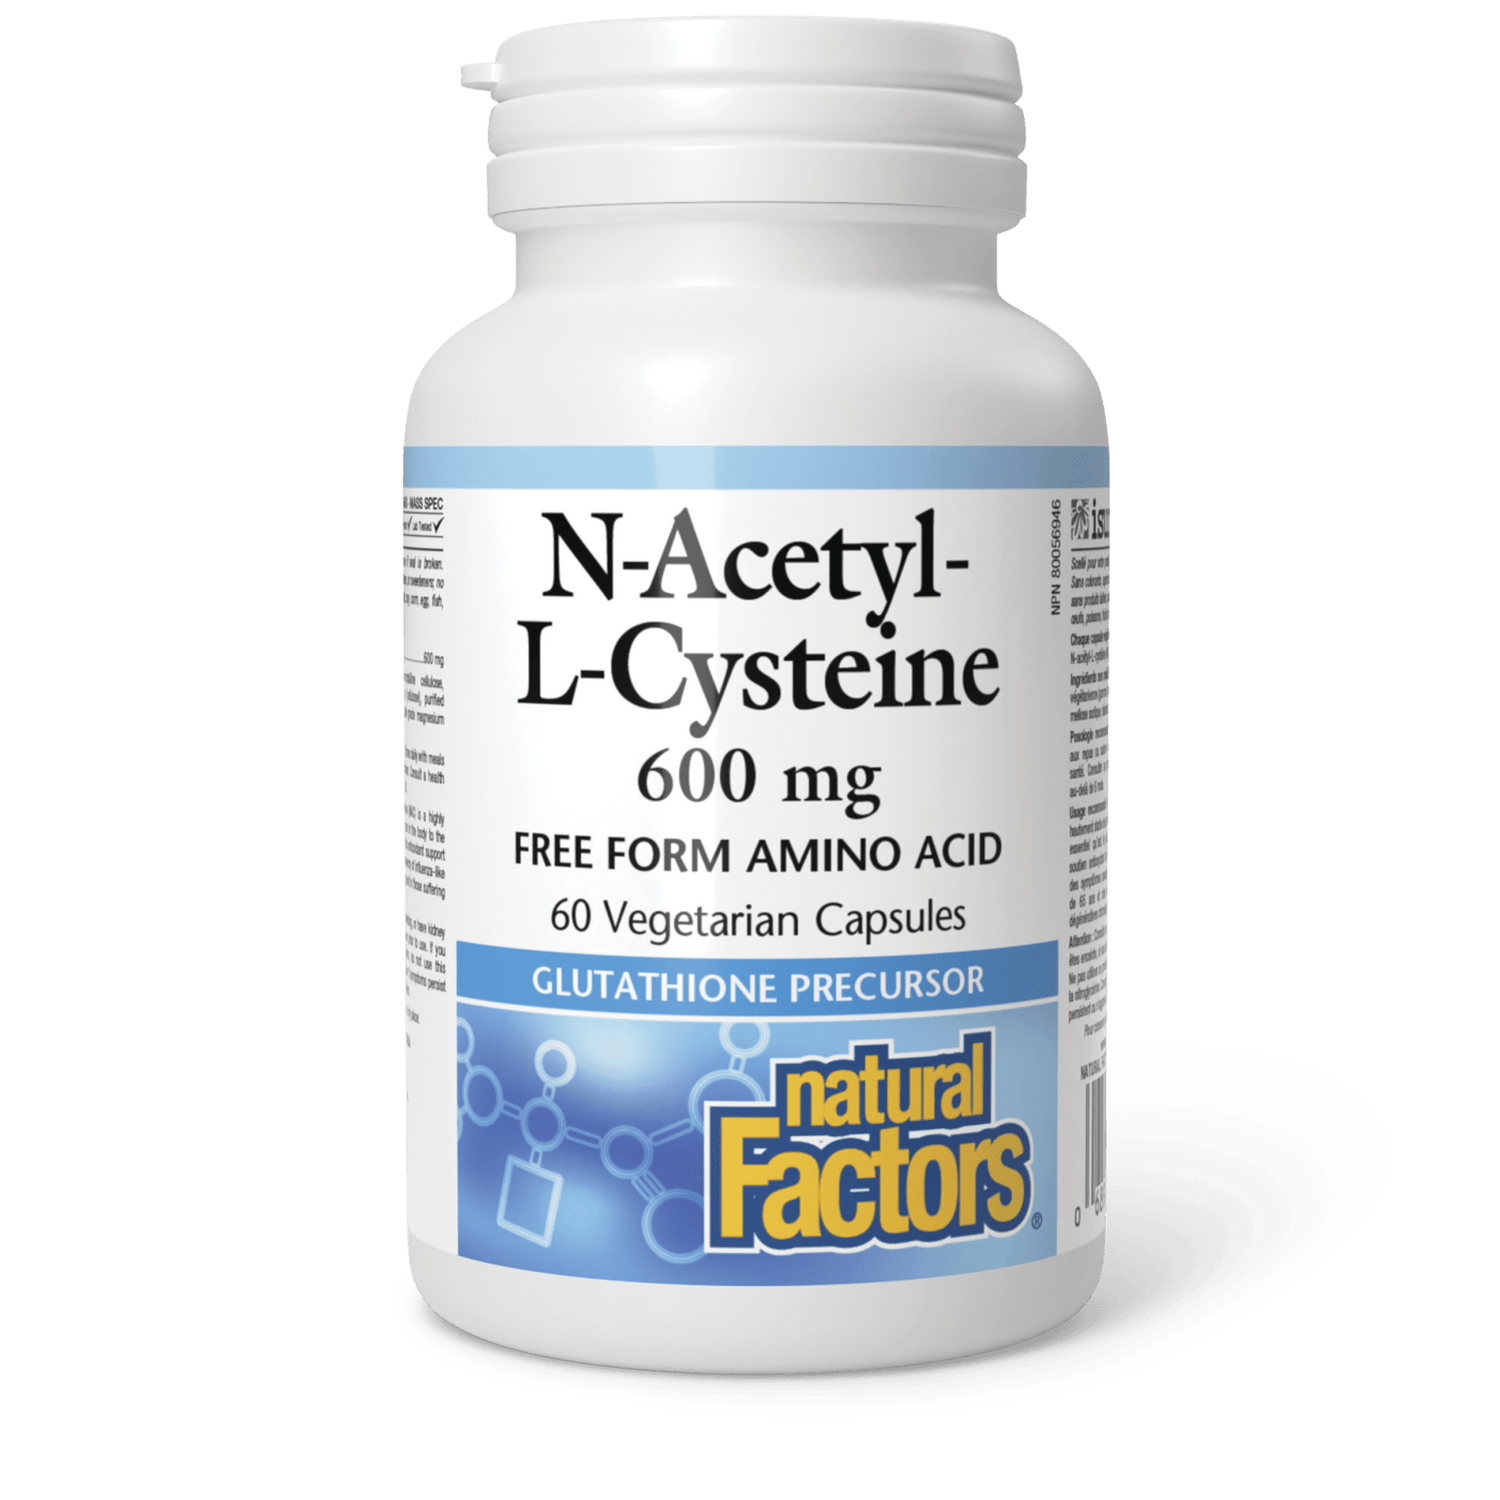 N-Acetyl-L-Cysteine 600 mg, Natural Factors|v|image|2818